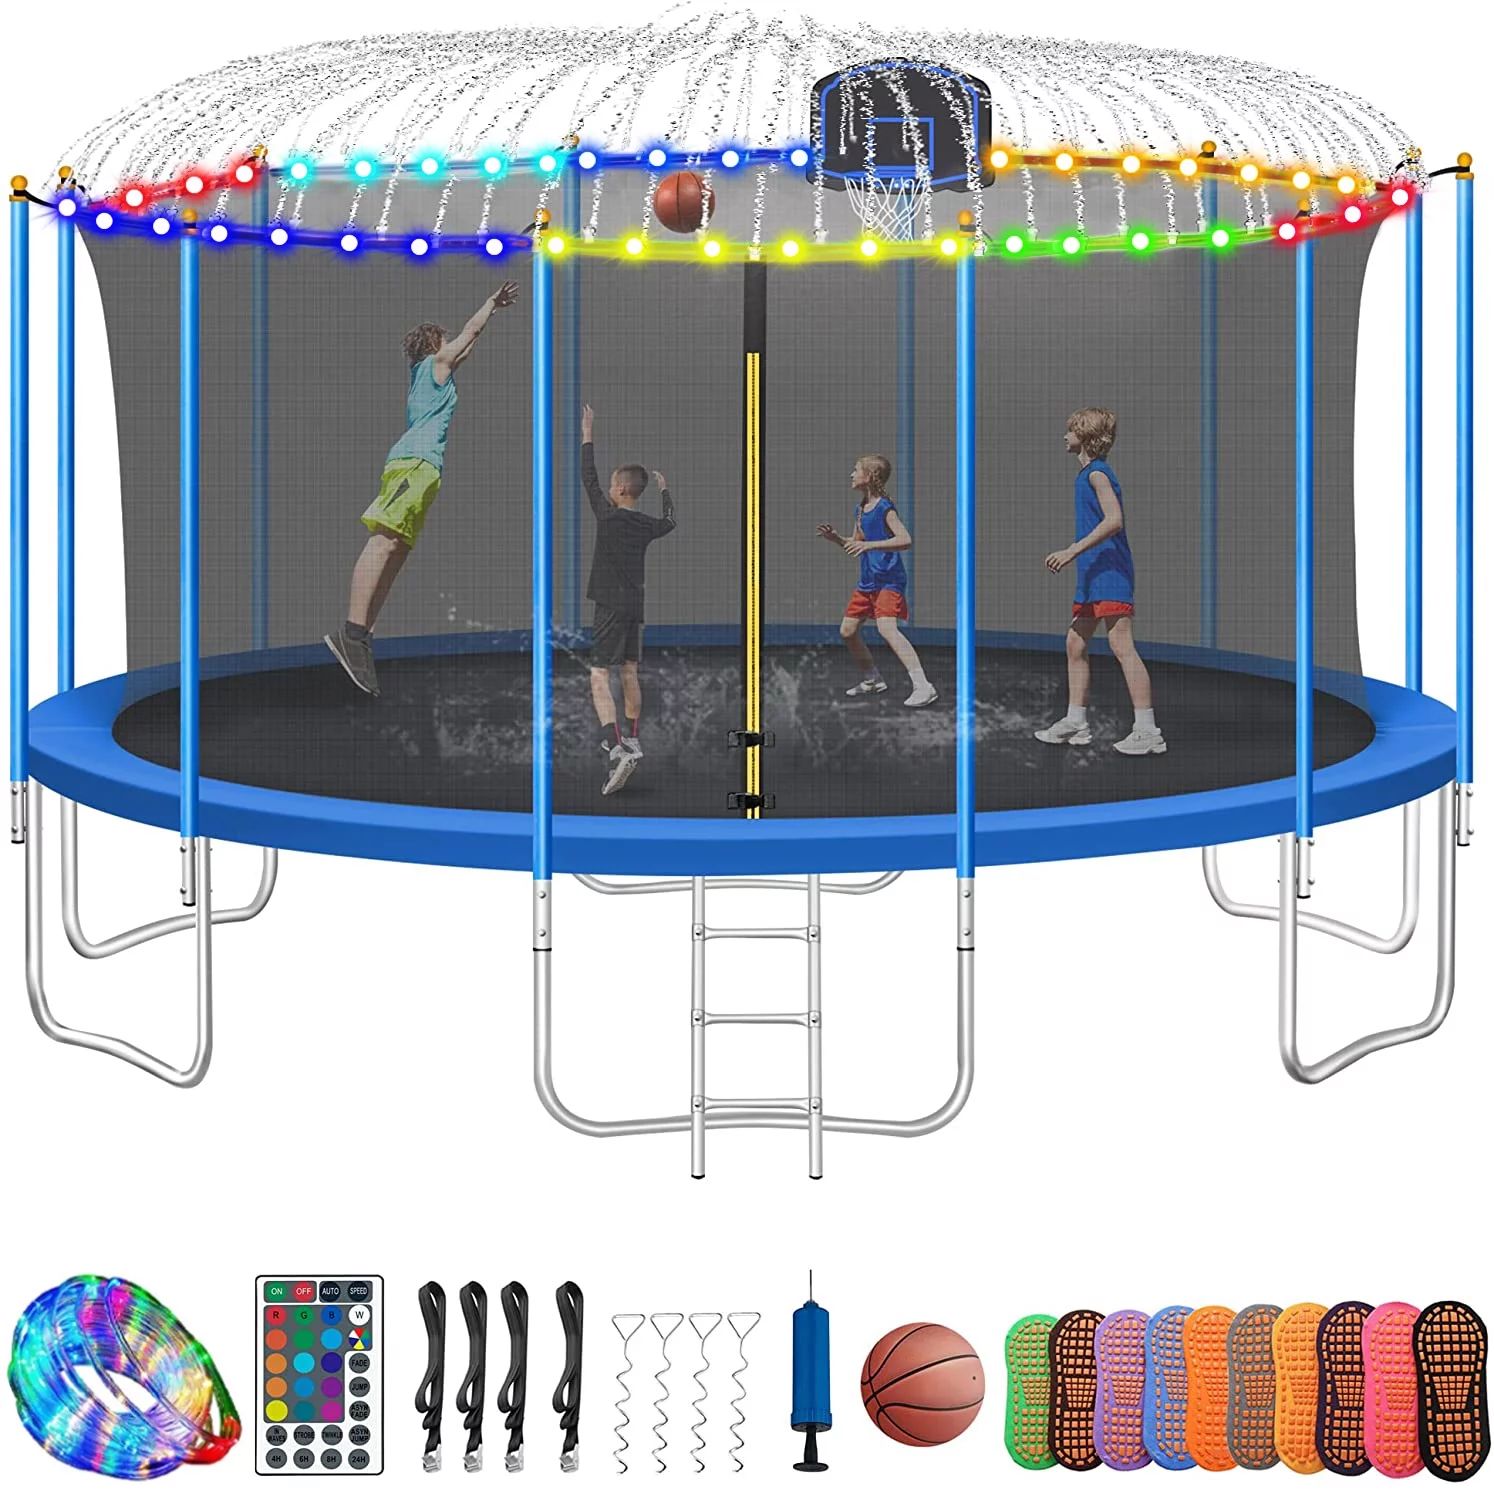 YORIN 1500LBS 16FT Trampoline for Adults/Kids, Outdoor Trampoline with Enclosure Net, Basketball ... | Walmart (US)